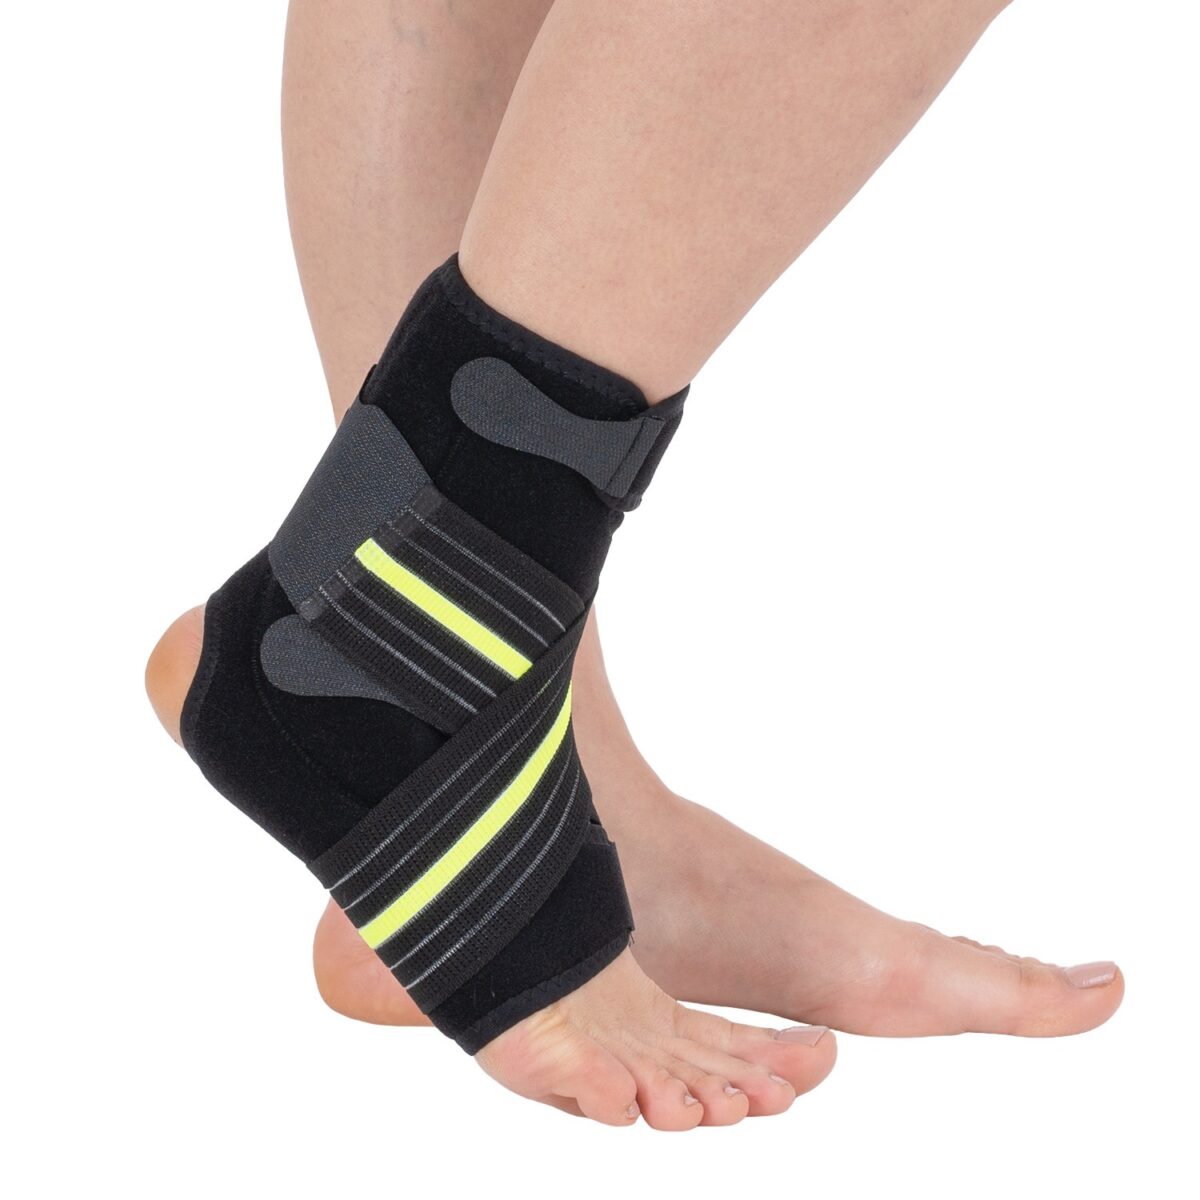 wingmed orthopedic equipments W606 ligament ankle support with 8 strap 65 1